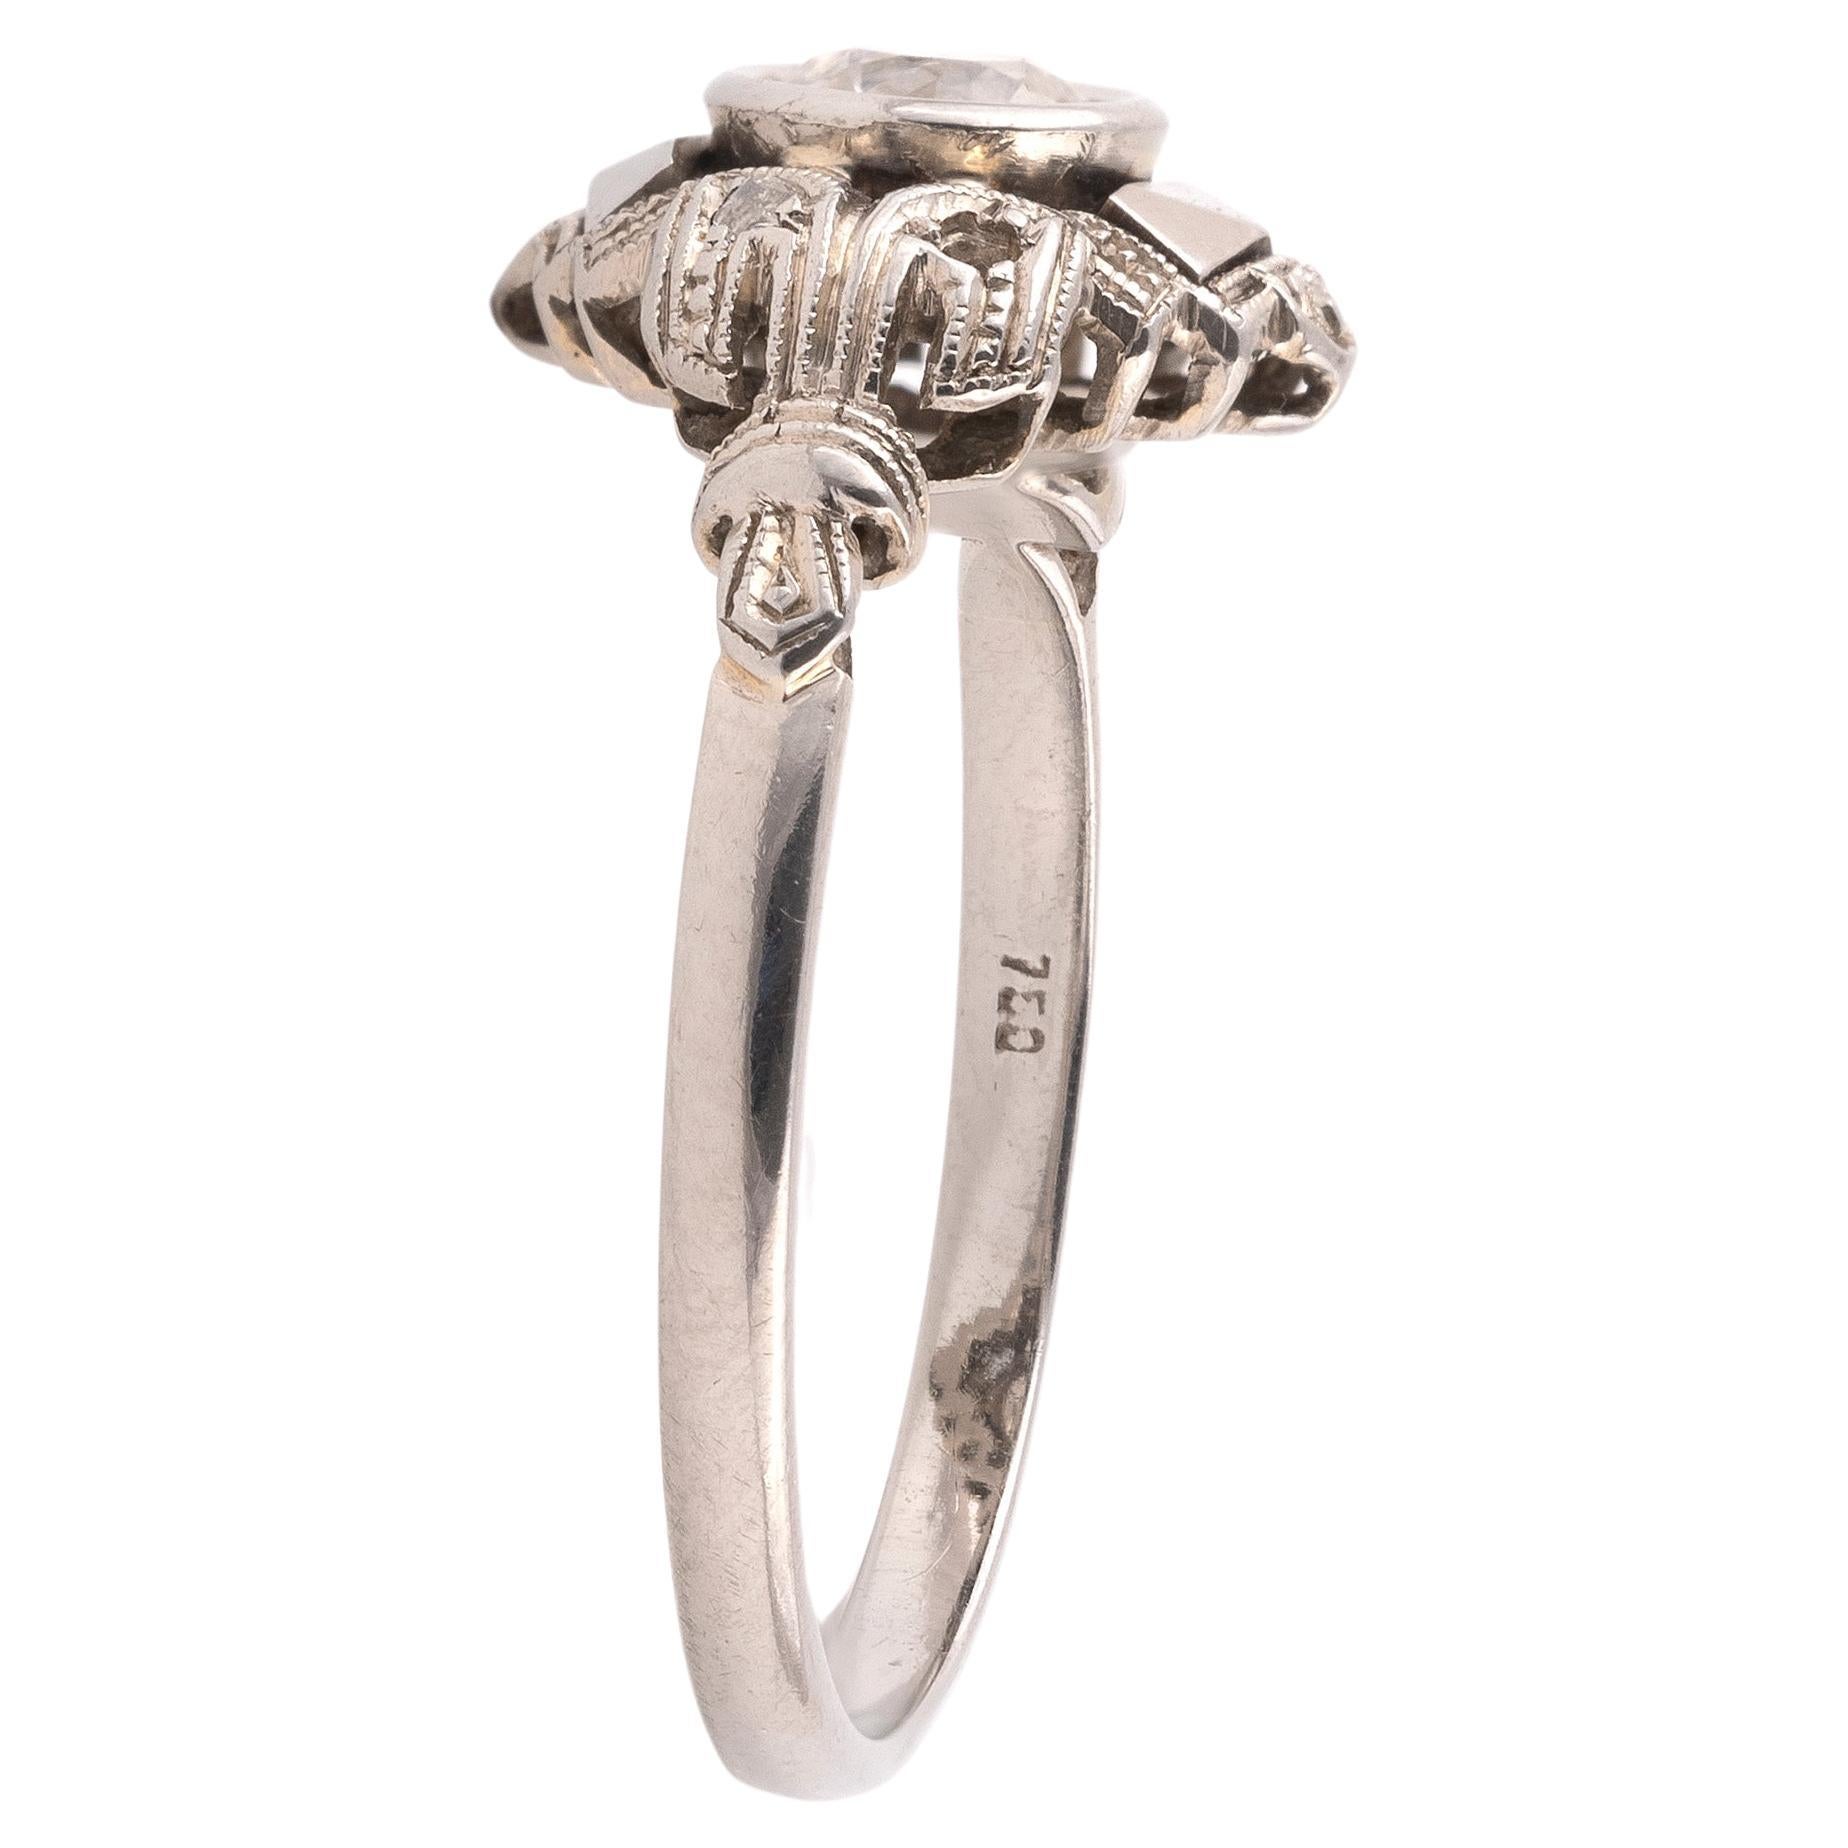 Centered with a old cut diamond weighing approx. 1 ct to an openwork bezel and shoulders, mounted in 18kt white gold
circa 1935
Size 7
Weight 2.1gr.